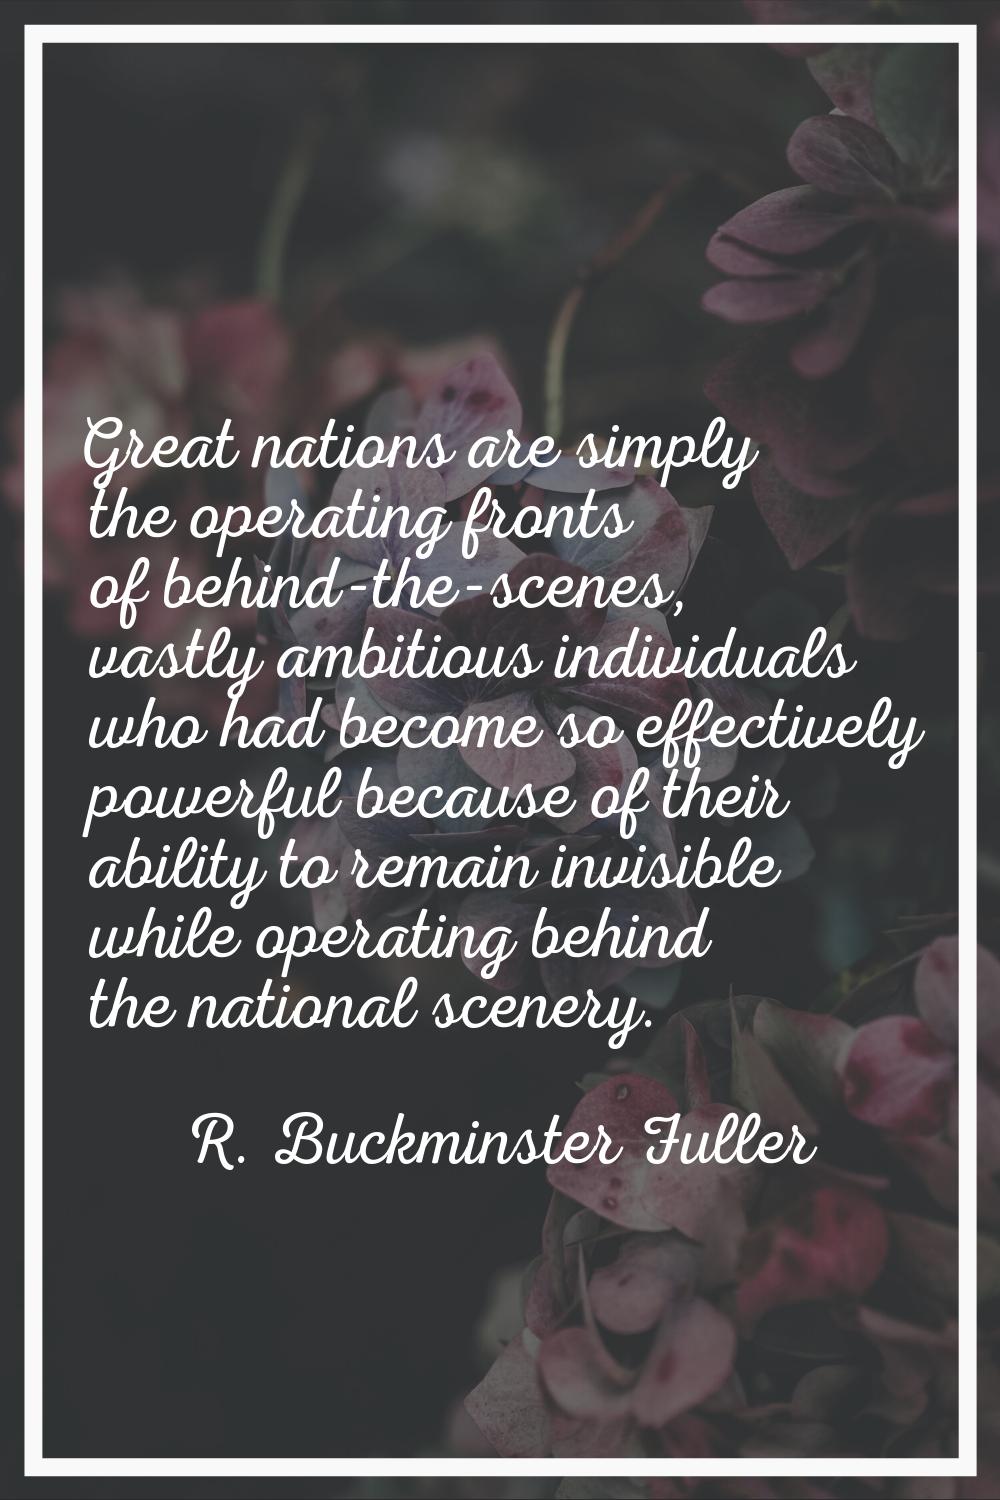 Great nations are simply the operating fronts of behind-the-scenes, vastly ambitious individuals wh